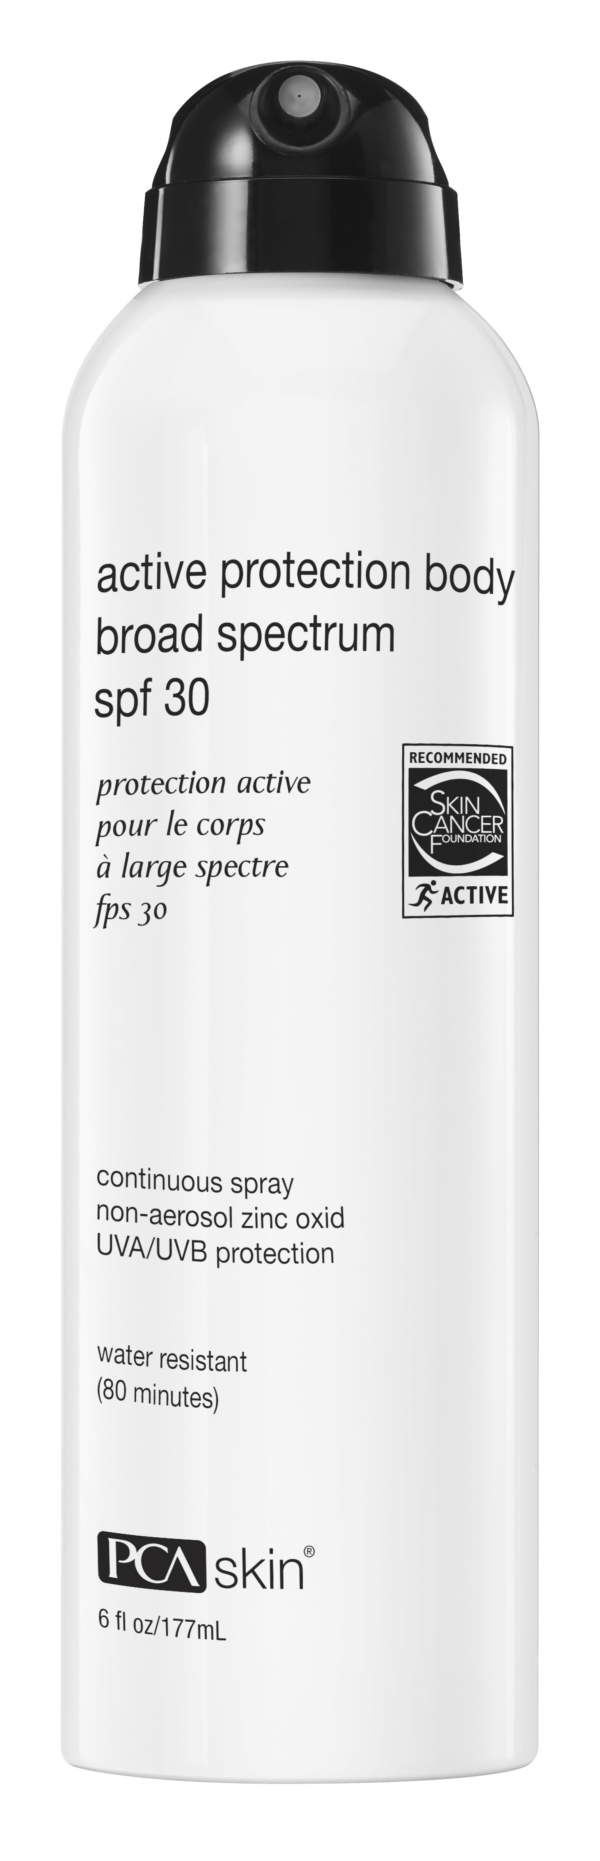 PCA_Products_Active_Protection_Body_Broad_Spectrum